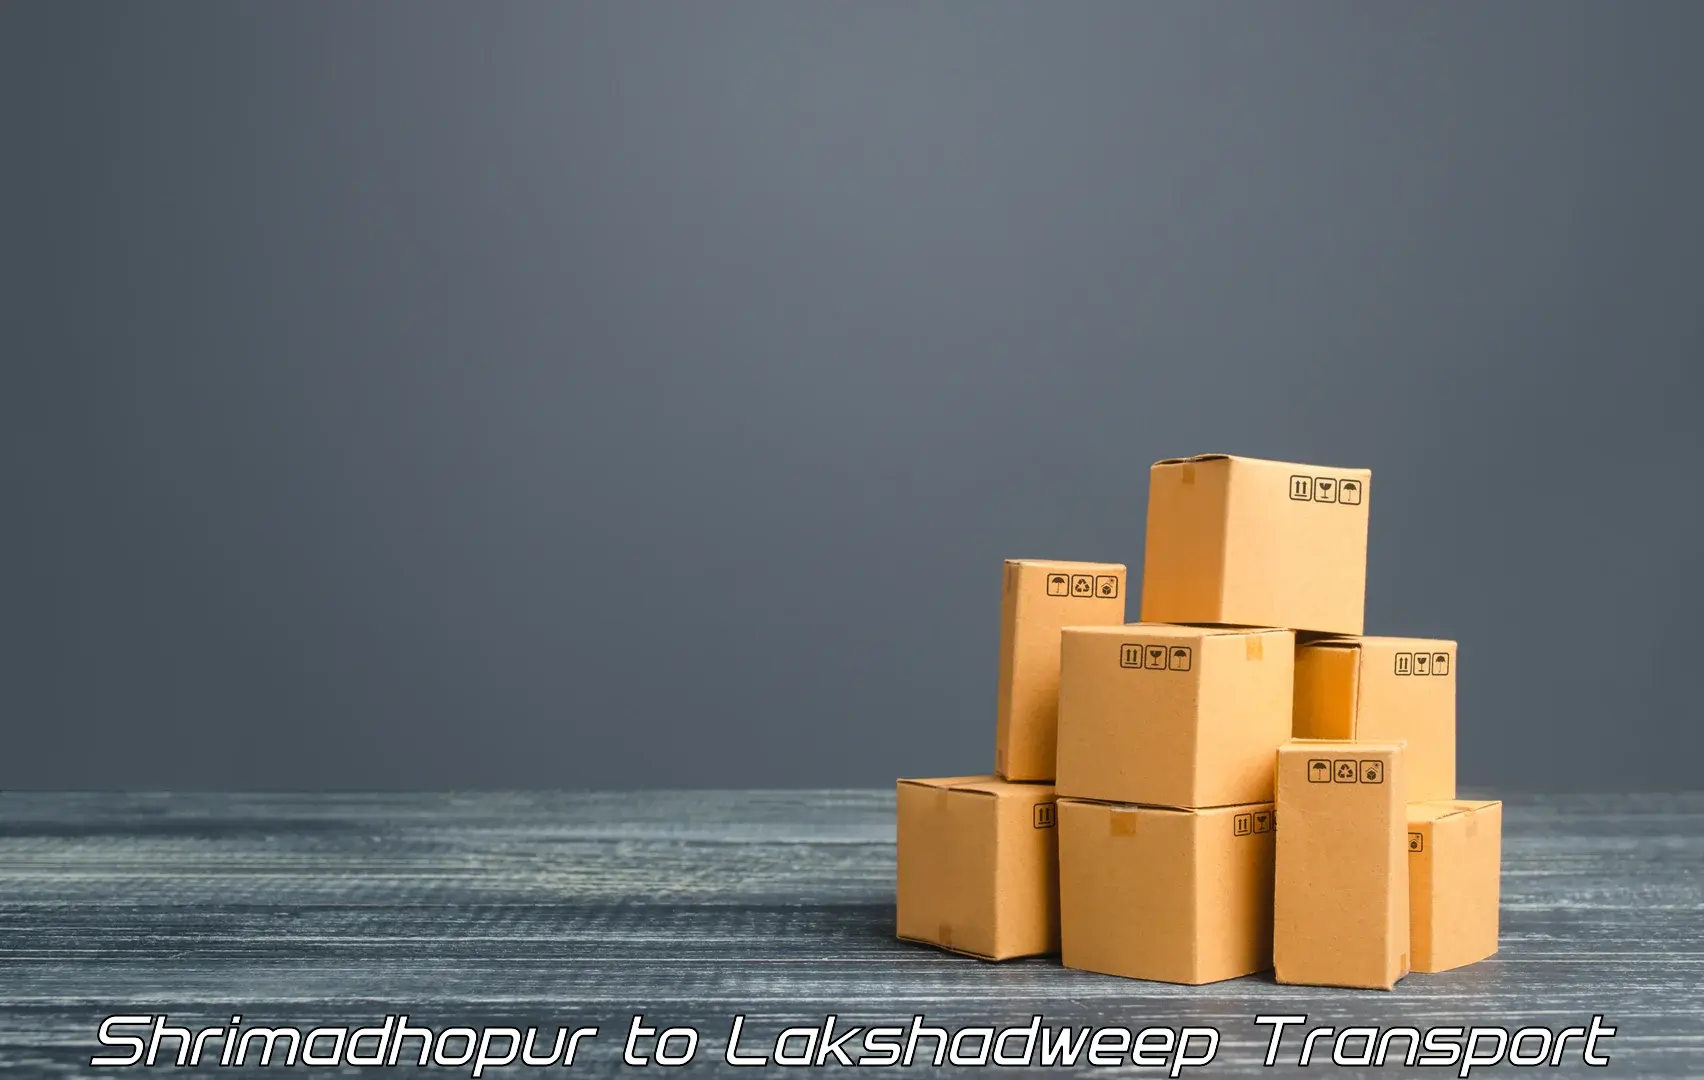 Air freight transport services Shrimadhopur to Lakshadweep